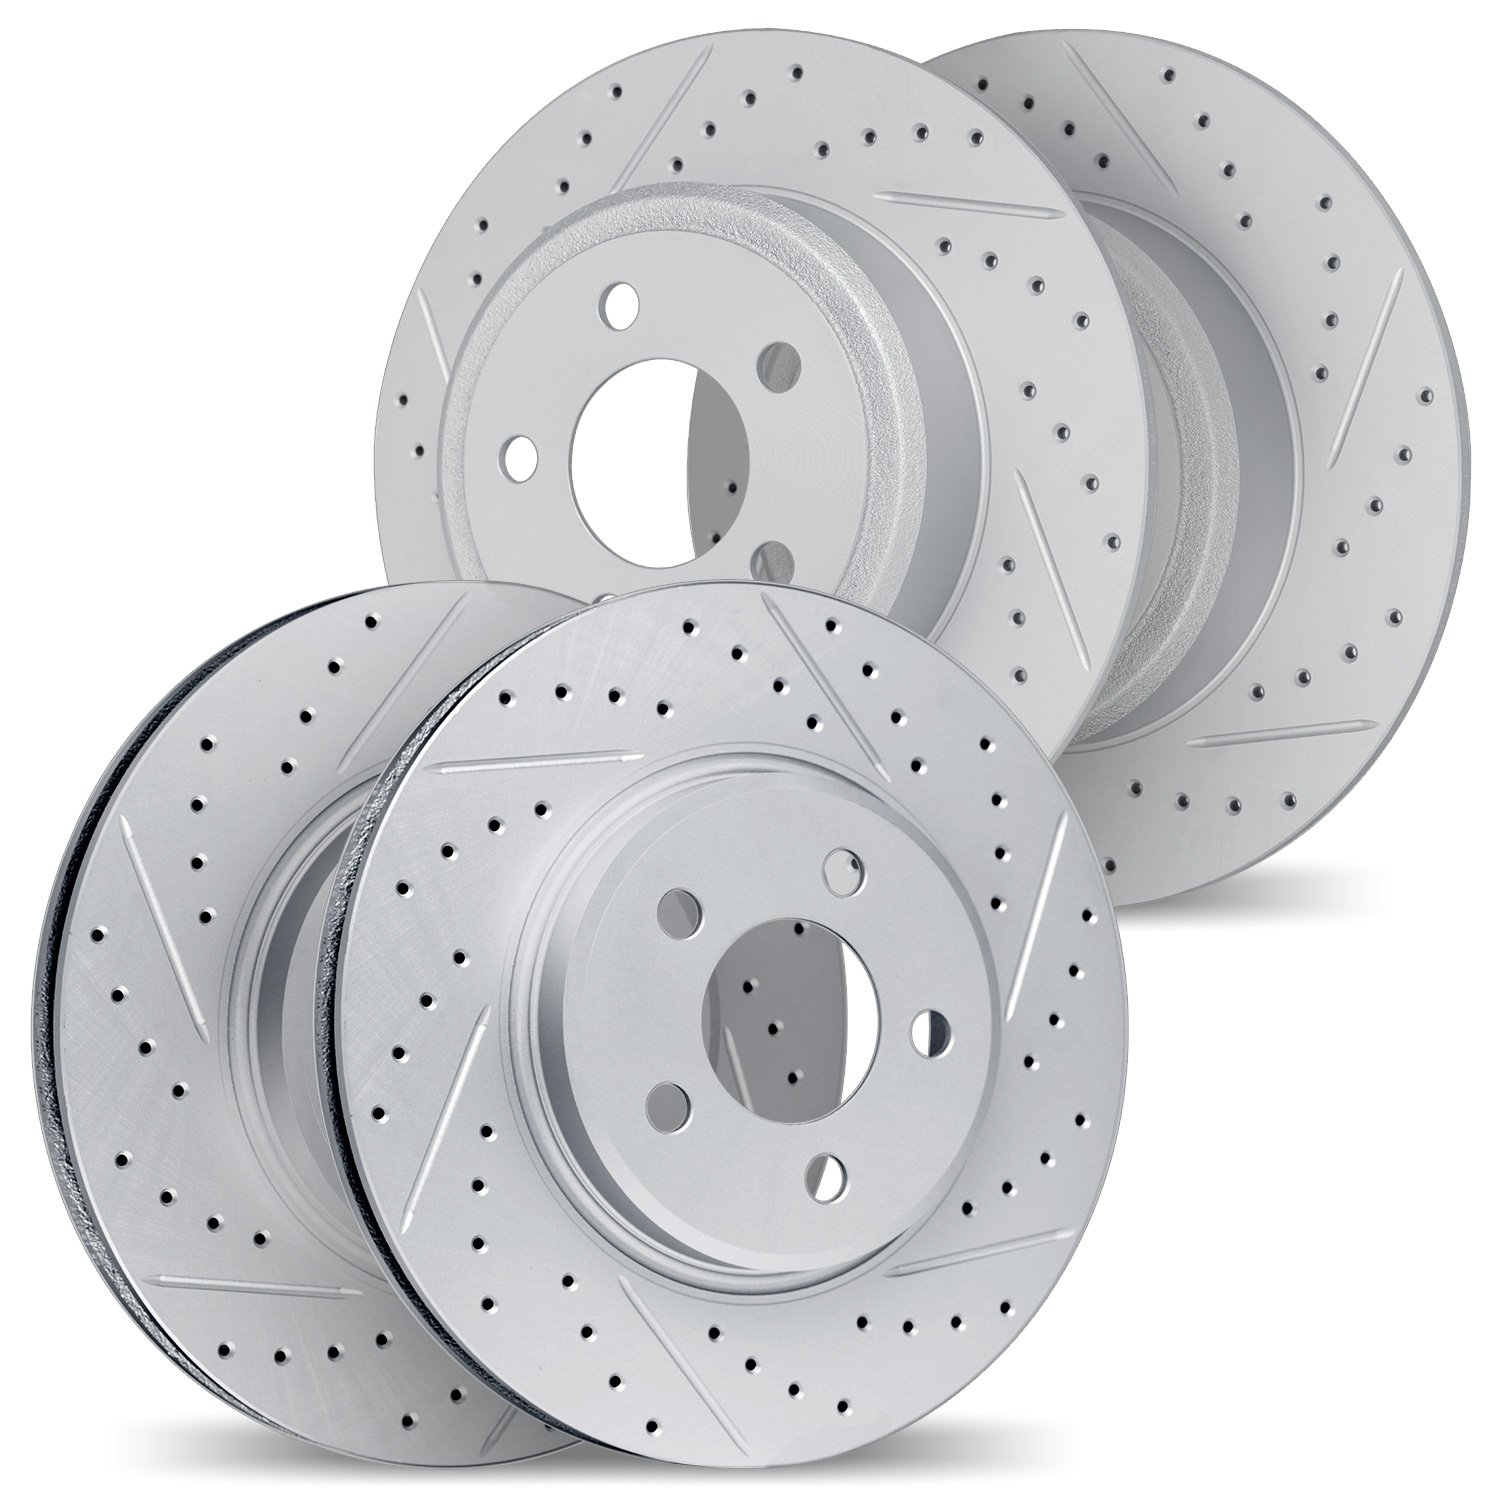 2004-54188 Geoperformance Drilled/Slotted Brake Rotors, Fits Select Ford/Lincoln/Mercury/Mazda, Position: Front and Rear